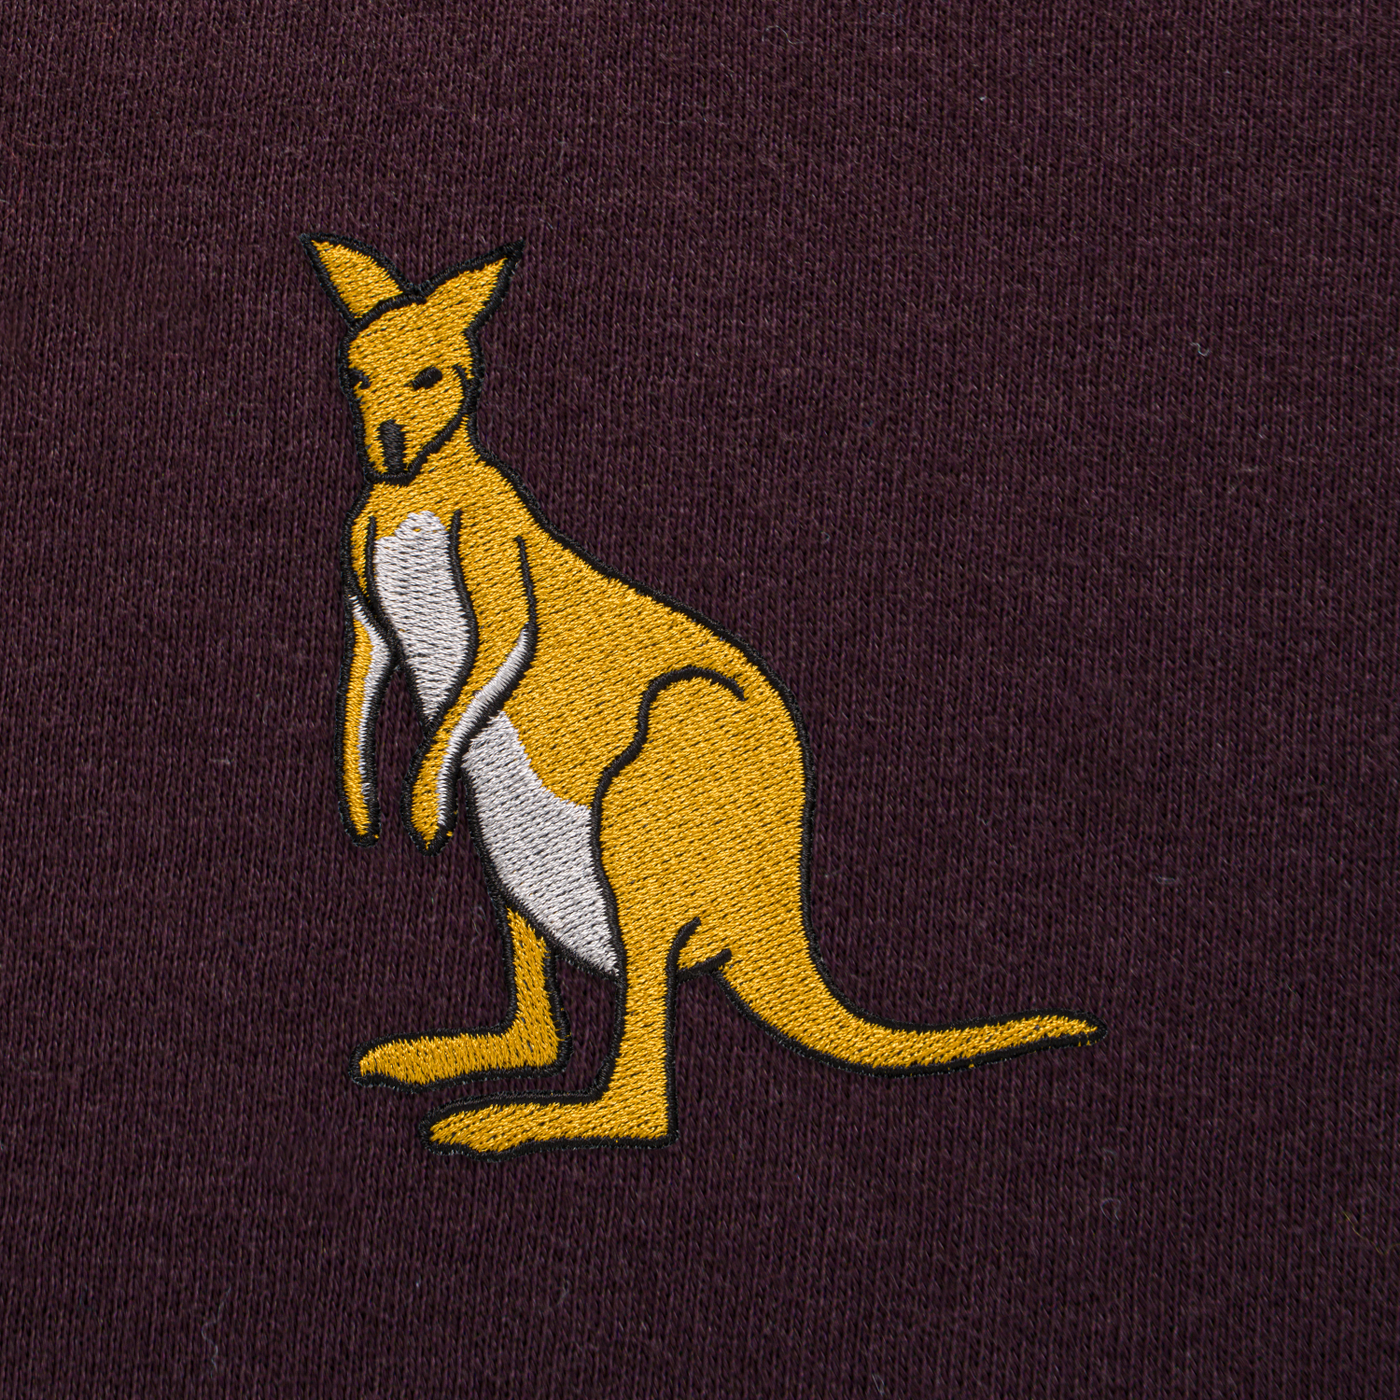 Bobby's Planet Men's Embroidered Kangaroo T-Shirt from Australia Down Under Animals Collection in Oxblood Color#color_oxblood